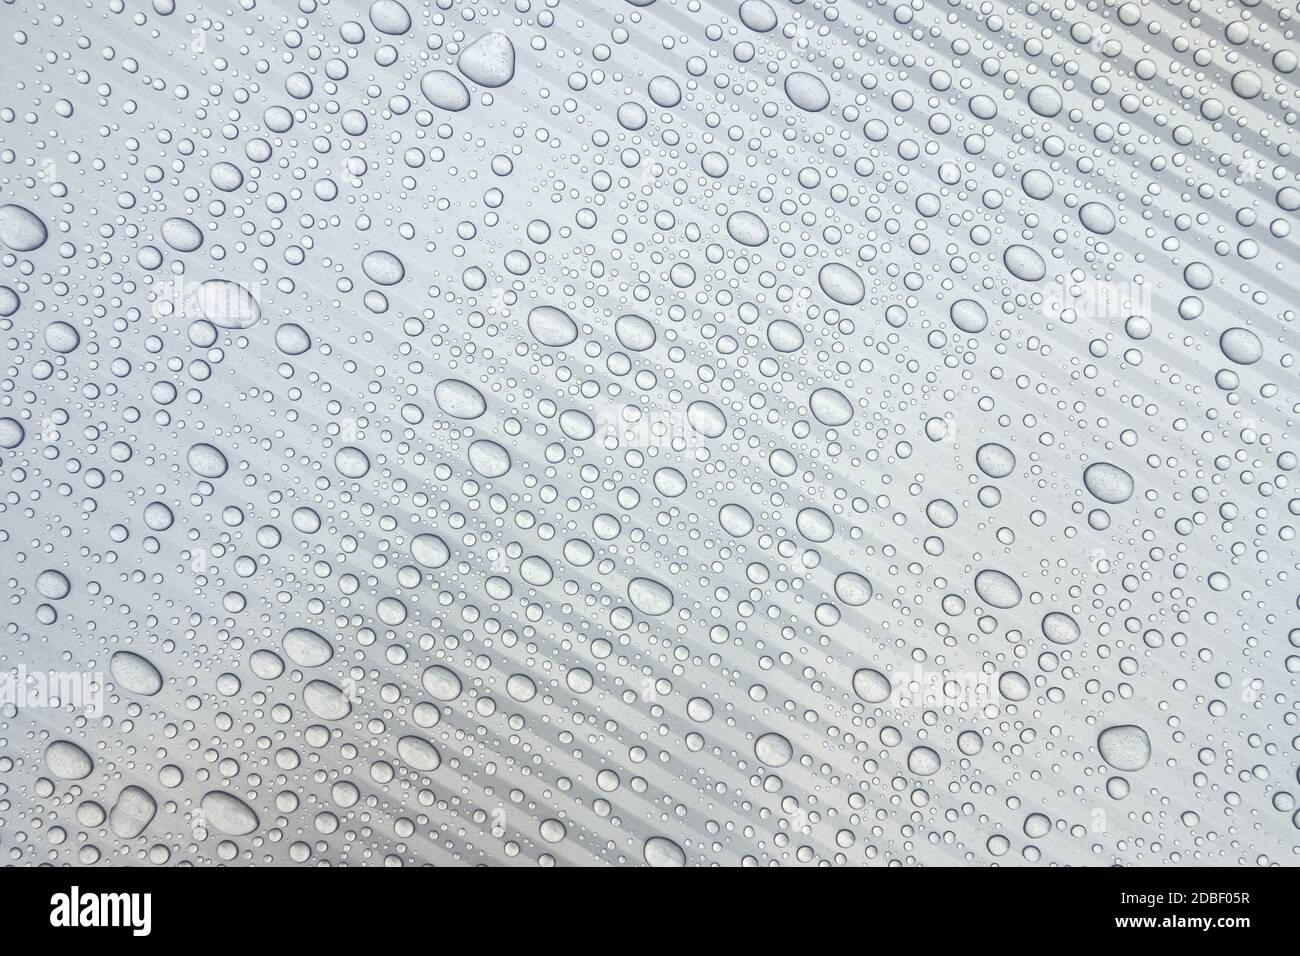 Light gray plastic surface with drops of water Stock Photo